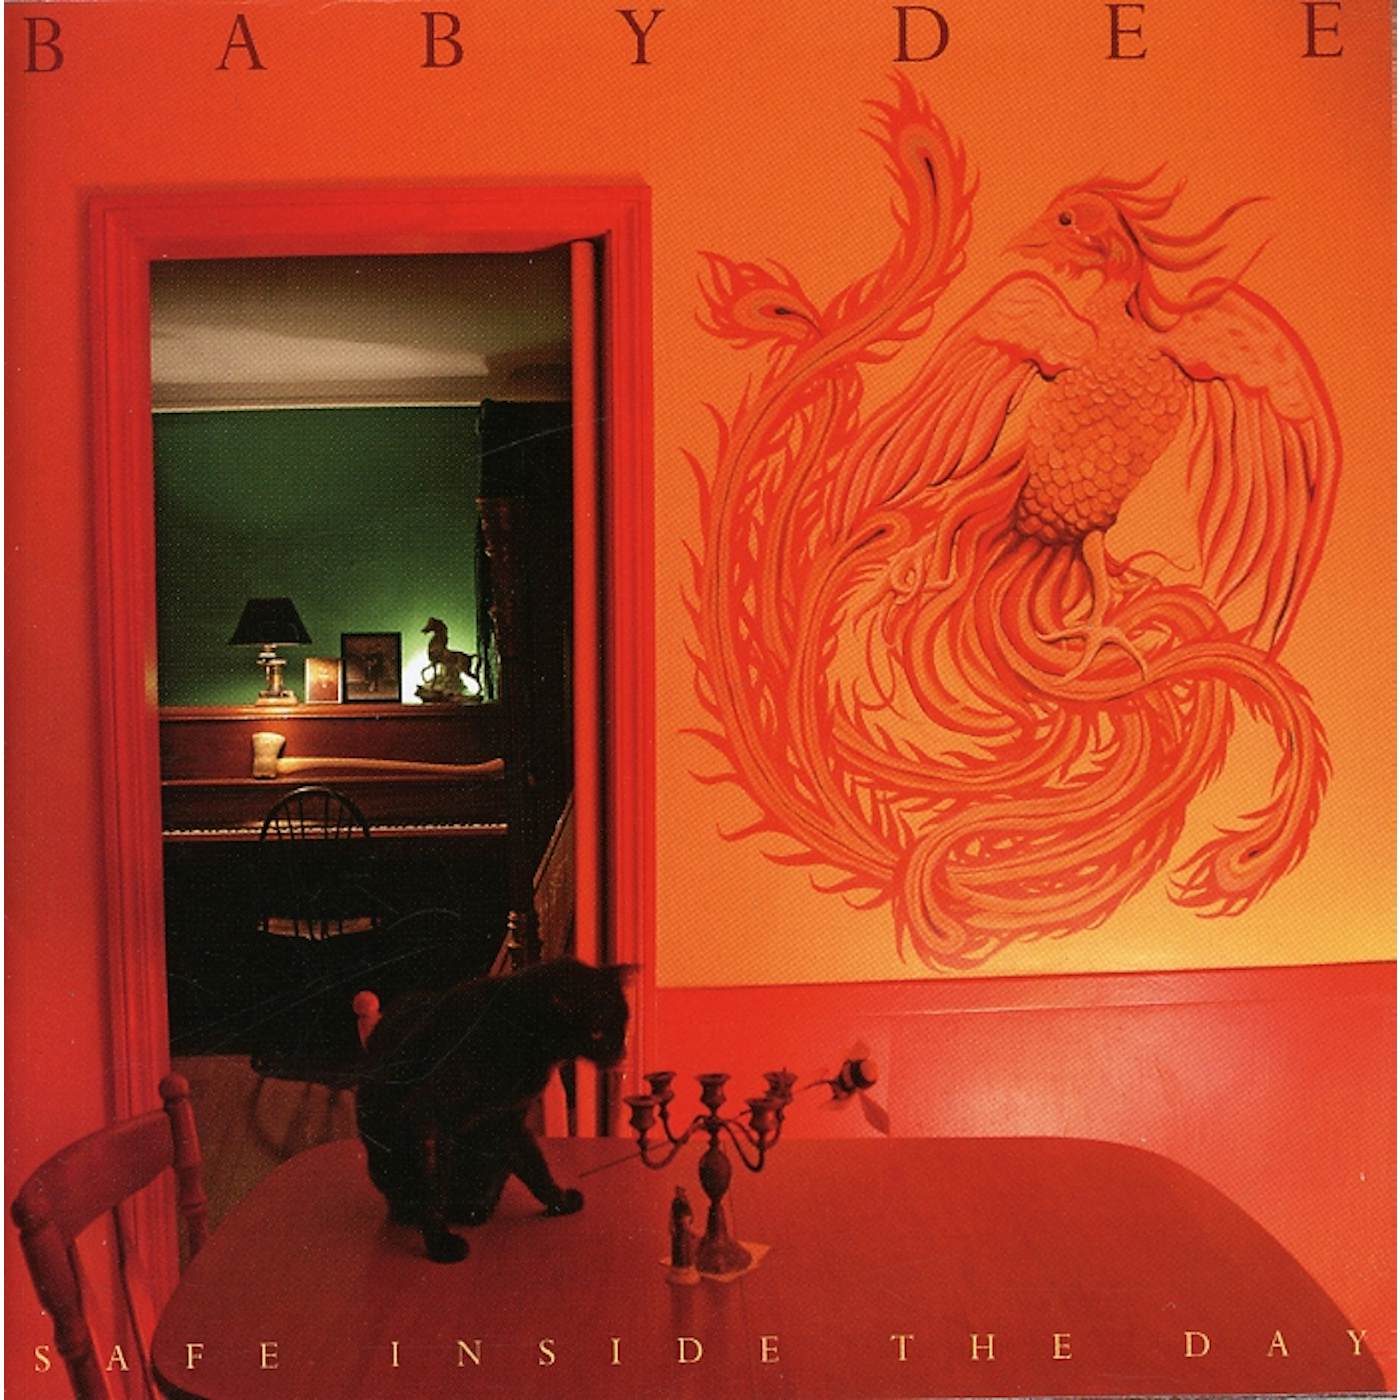 Baby Dee SAFE INSIDE THE DAY CD